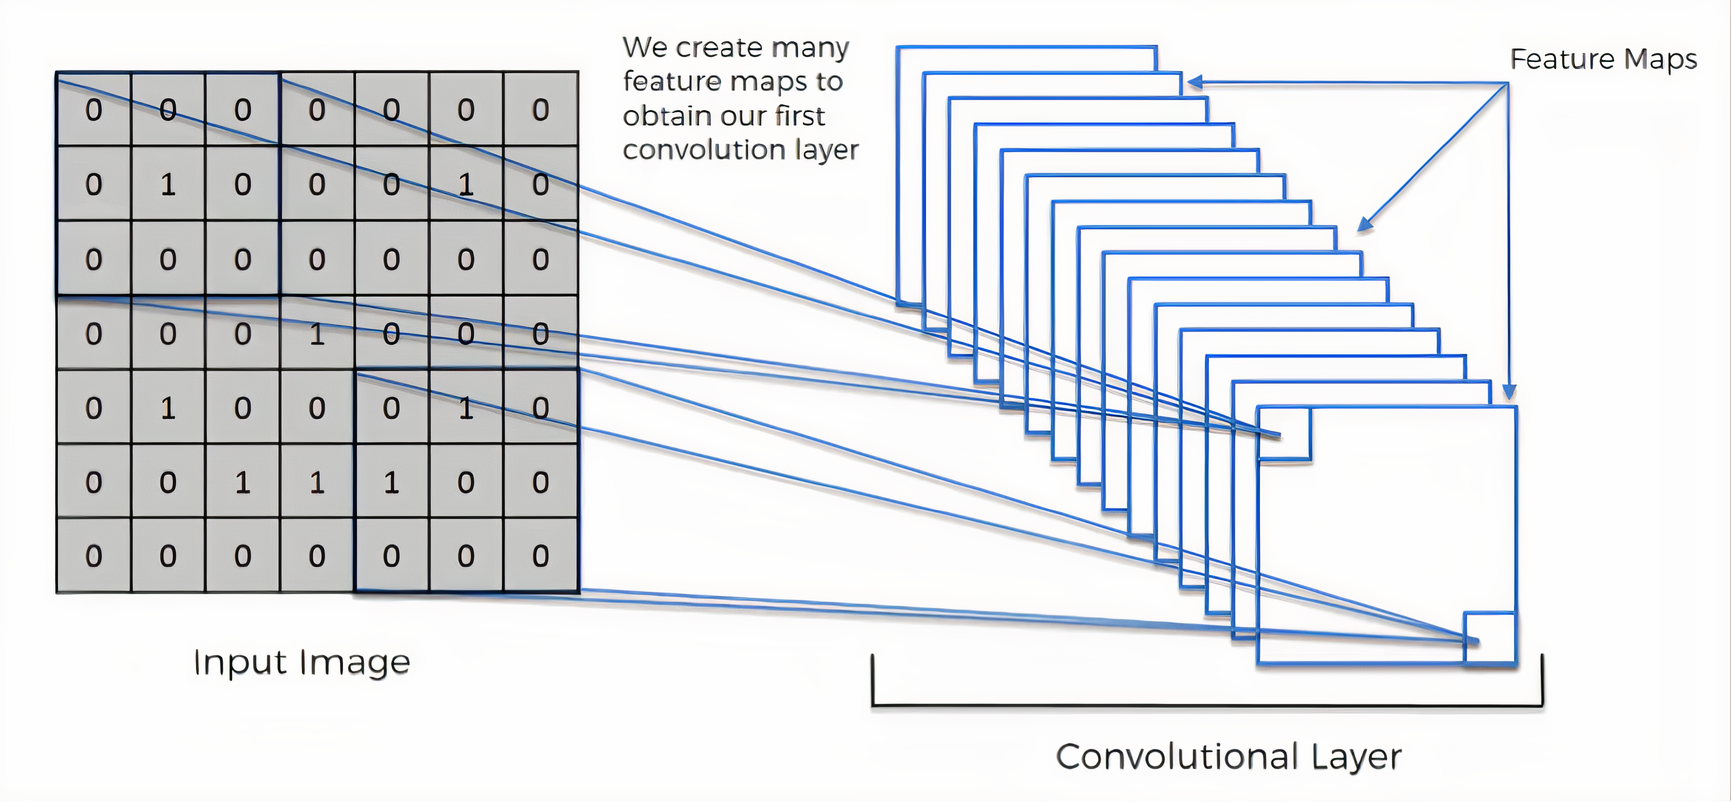 Multiple feature maps are stacked together to create a convolutional layer